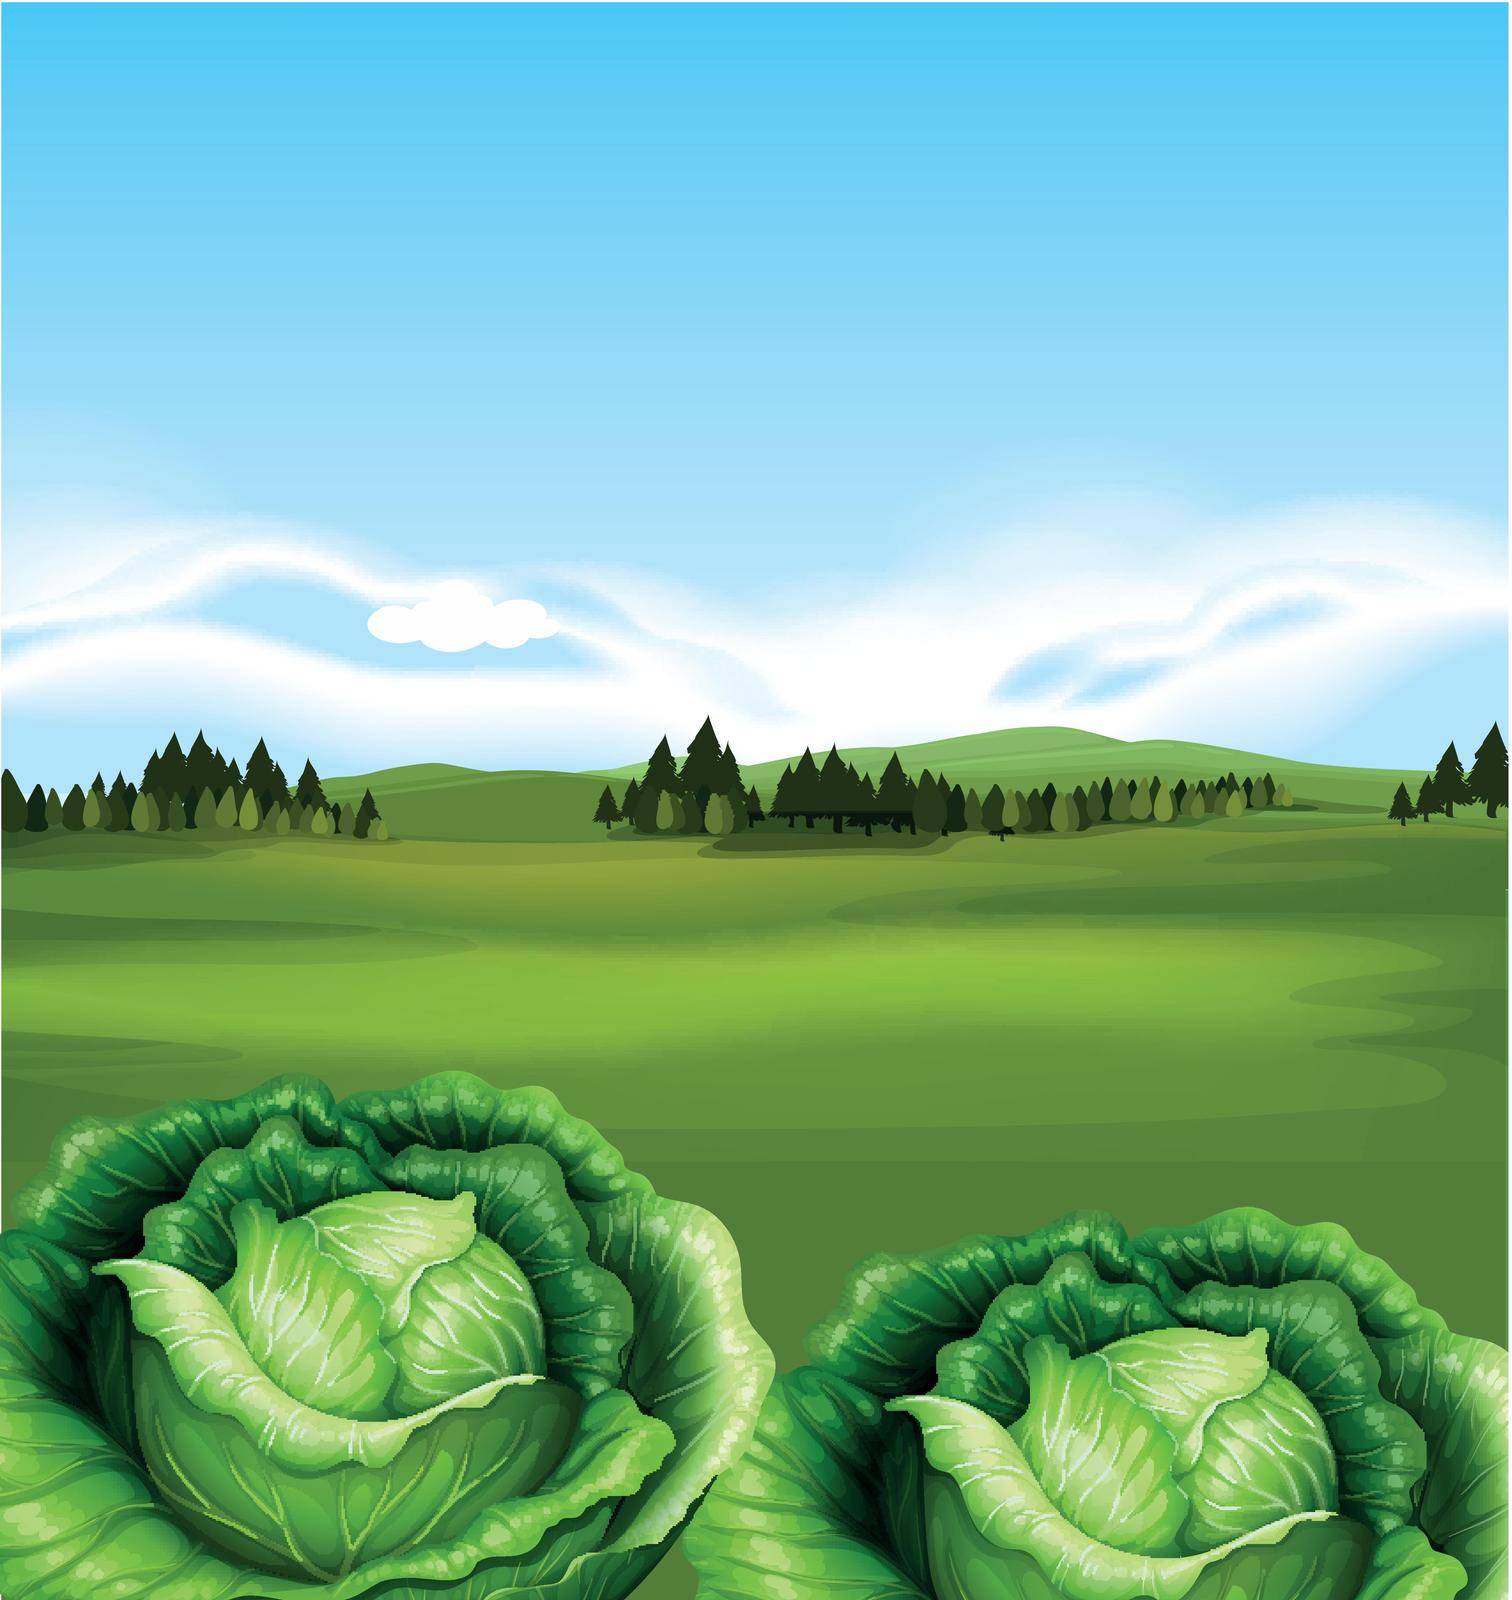 Organic Cabbage with Beautiful Scenery by iimages